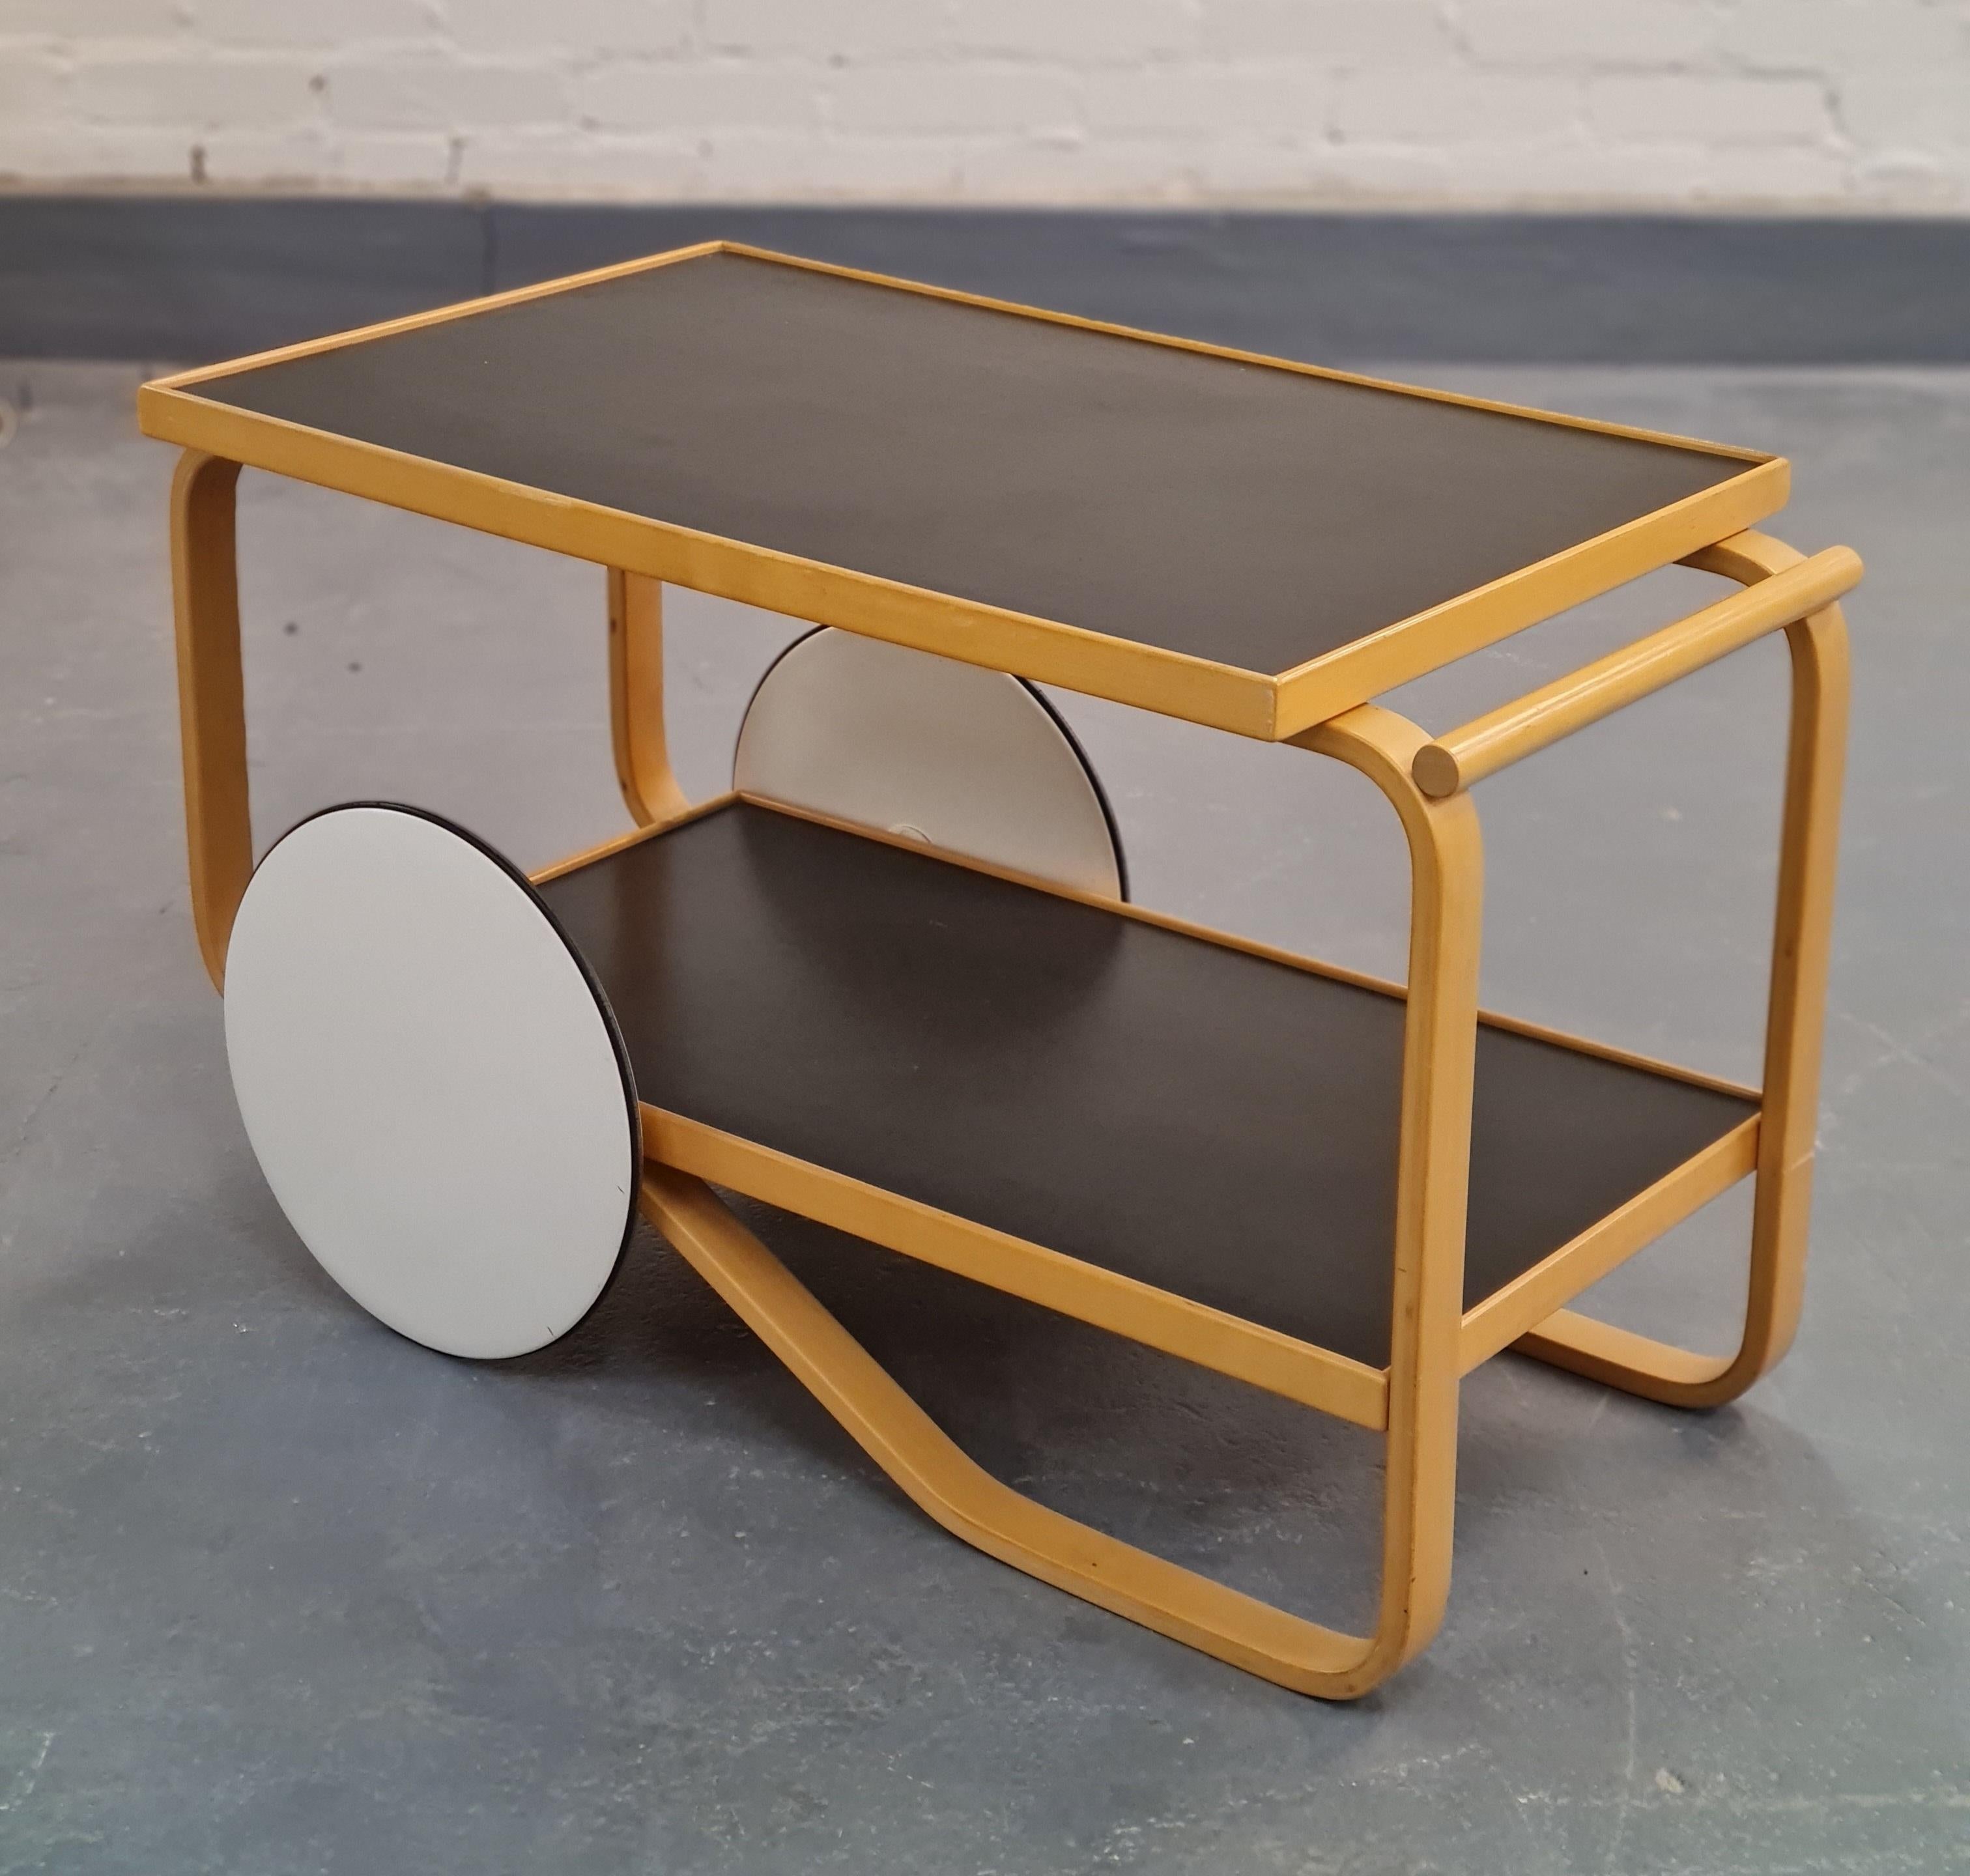 Alvar Aalto first introduced this model cart in the 1930s. It is the simplest of his cart series. Inspirations of the British tea culture as well as Japanese wood works is evident in this piece.
This simple yet elegant cart is easy to move and is